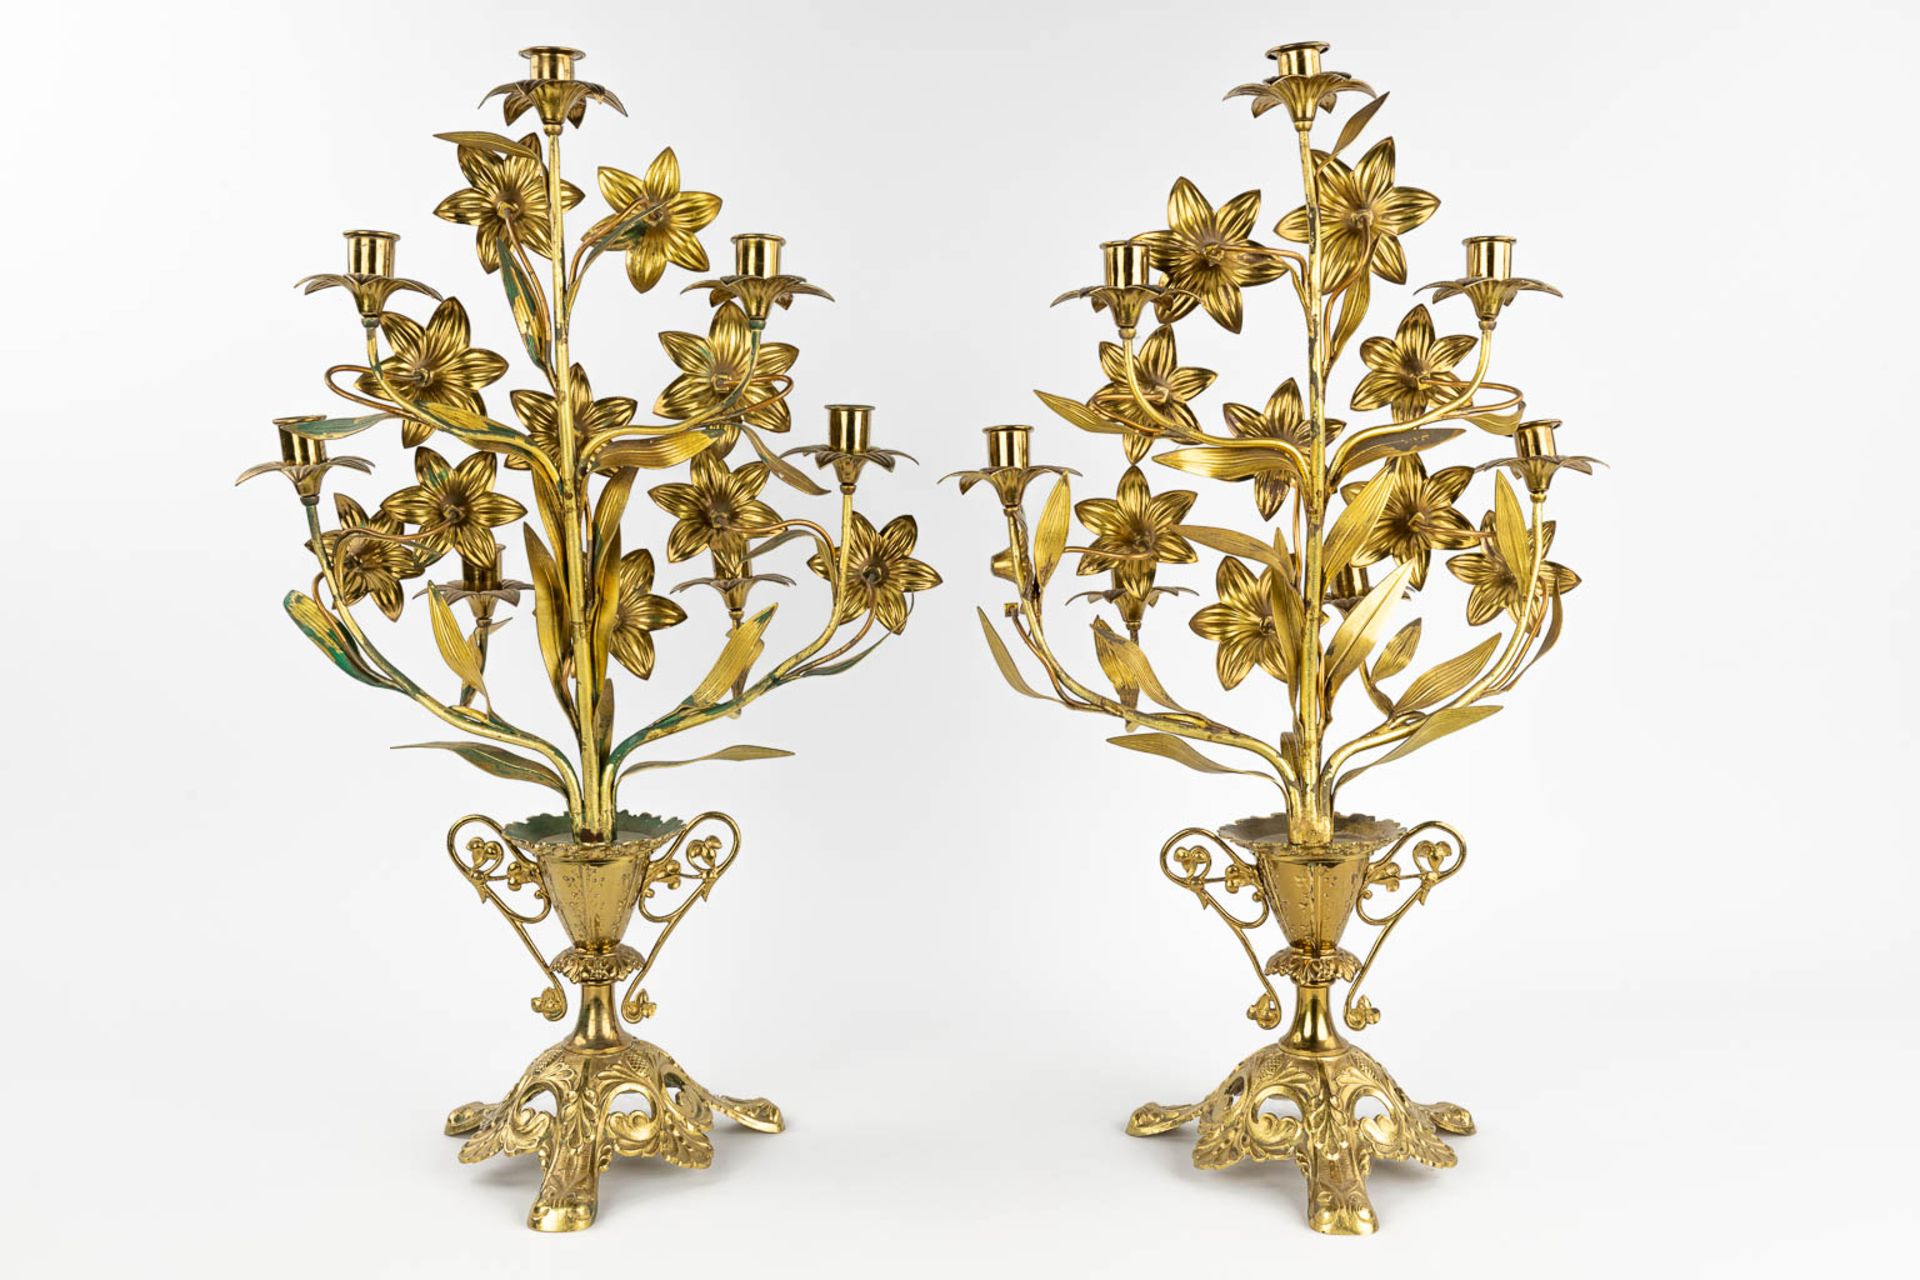 A pair of Church candlesticks, bronze and decorated with flowers. (L: 23 x W: 38 x H: 53 cm) - Image 5 of 13